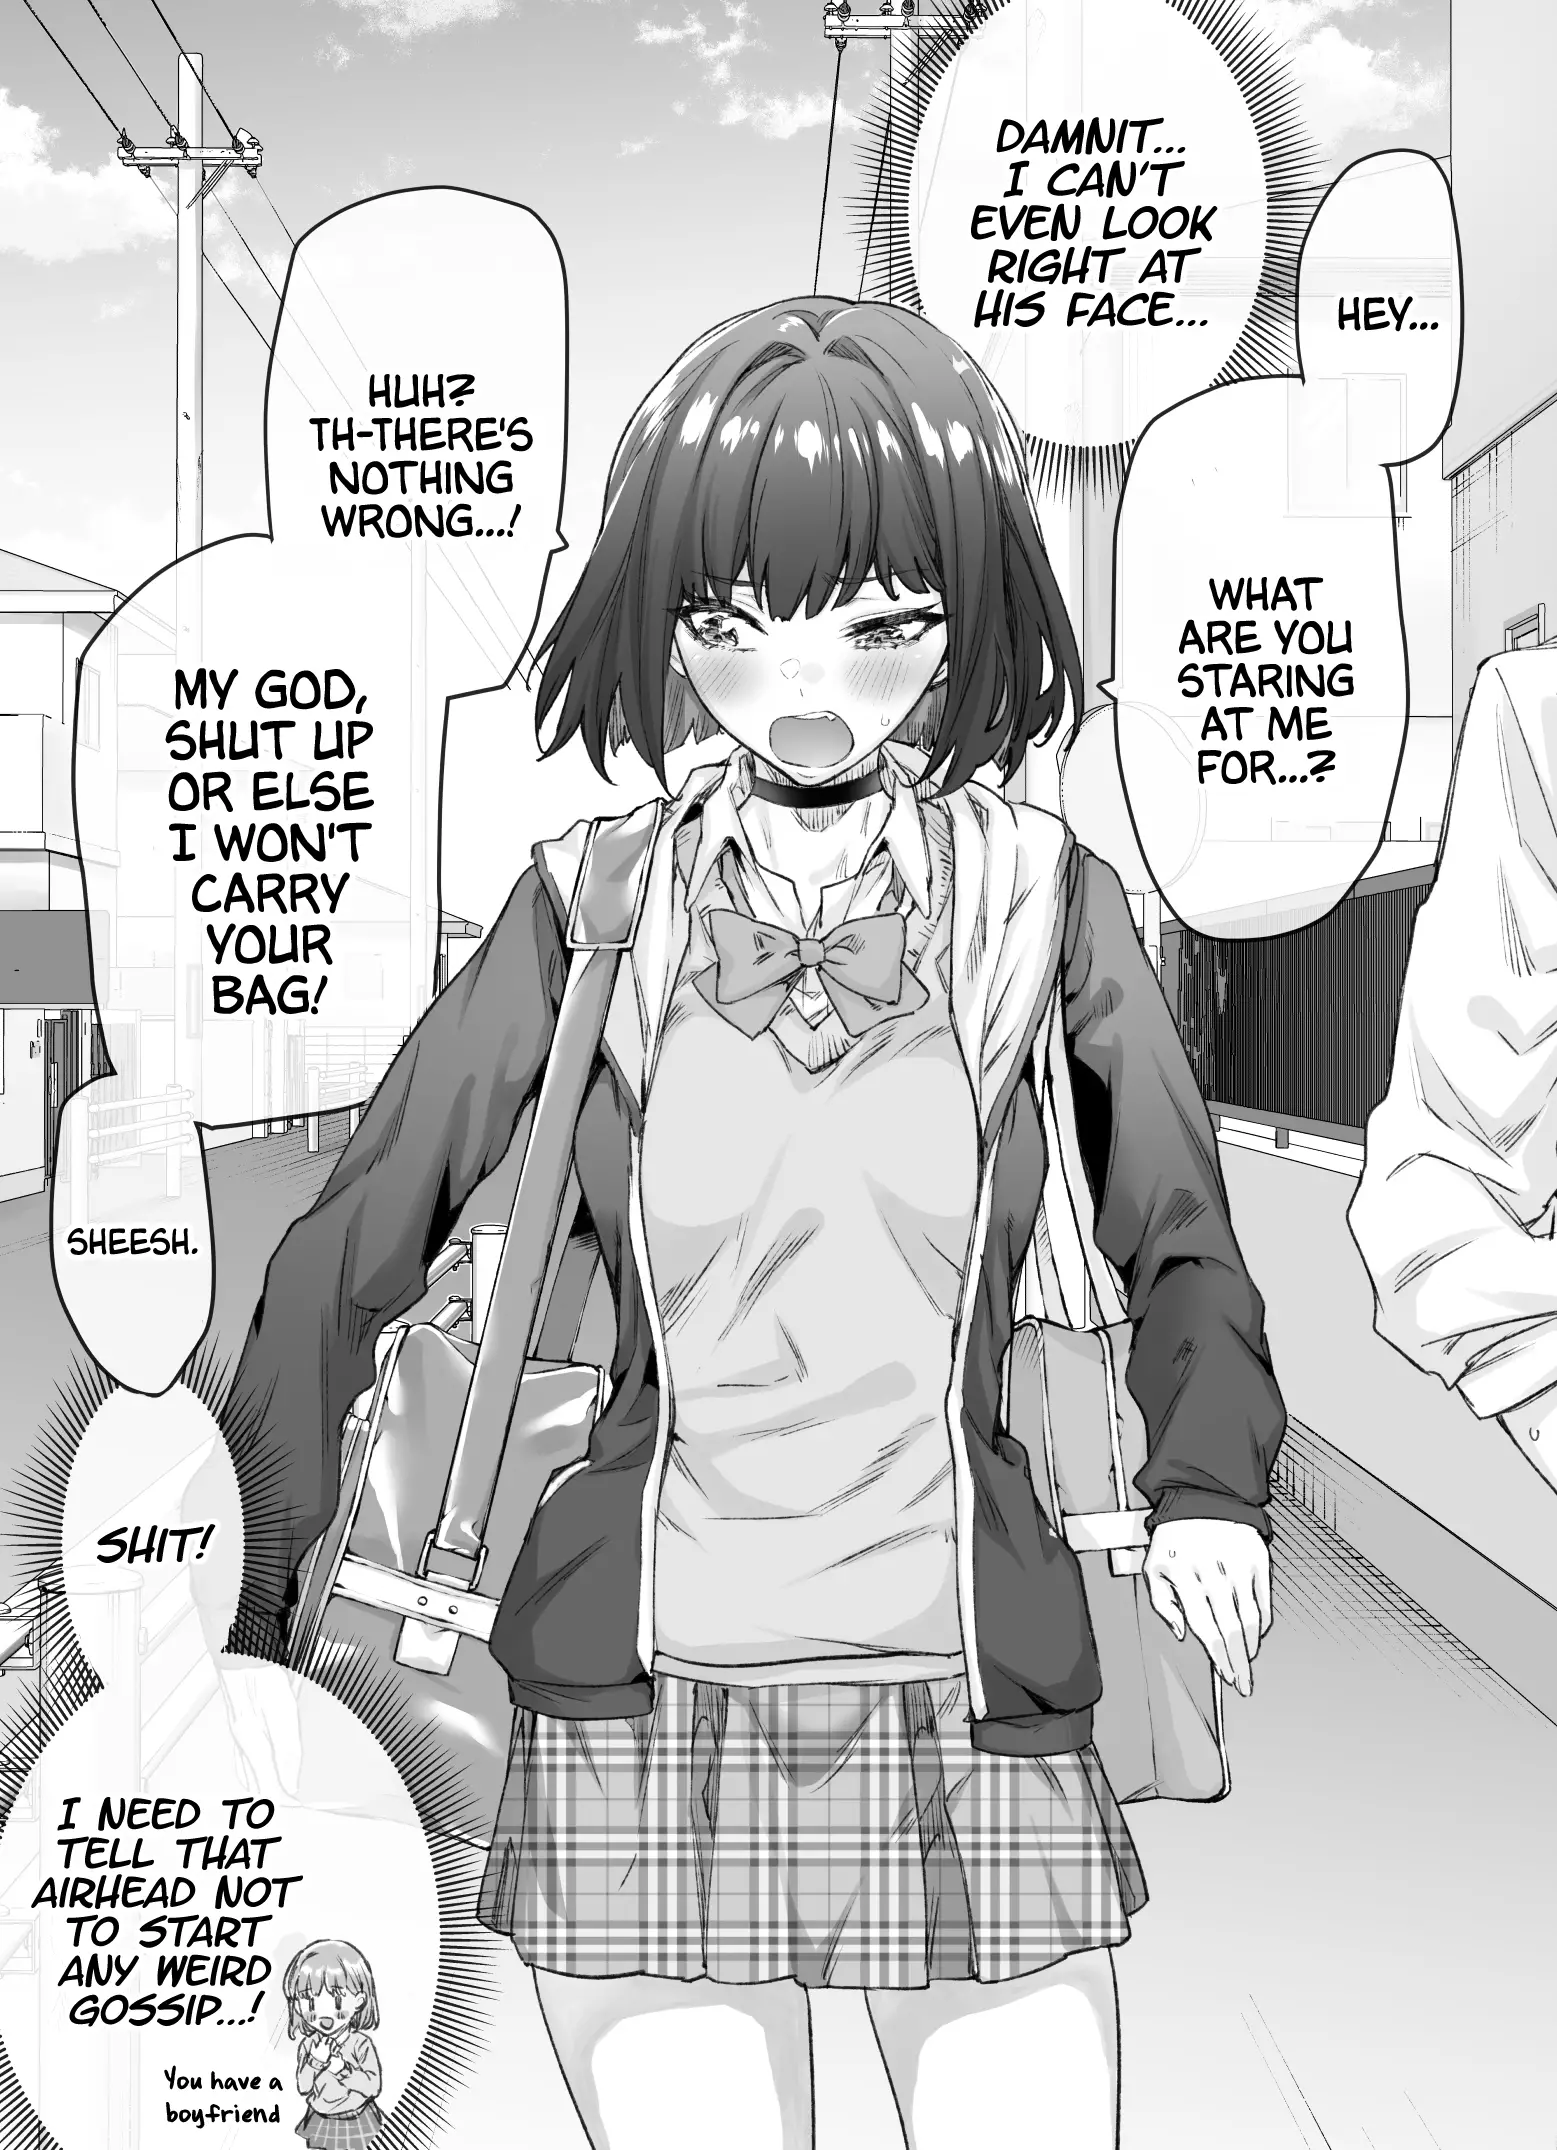 The Tsuntsuntsuntsuntsuntsun Tsuntsuntsuntsuntsundere Girl Getting Less And Less Tsun Day By Day - 15 page 1-e295b048